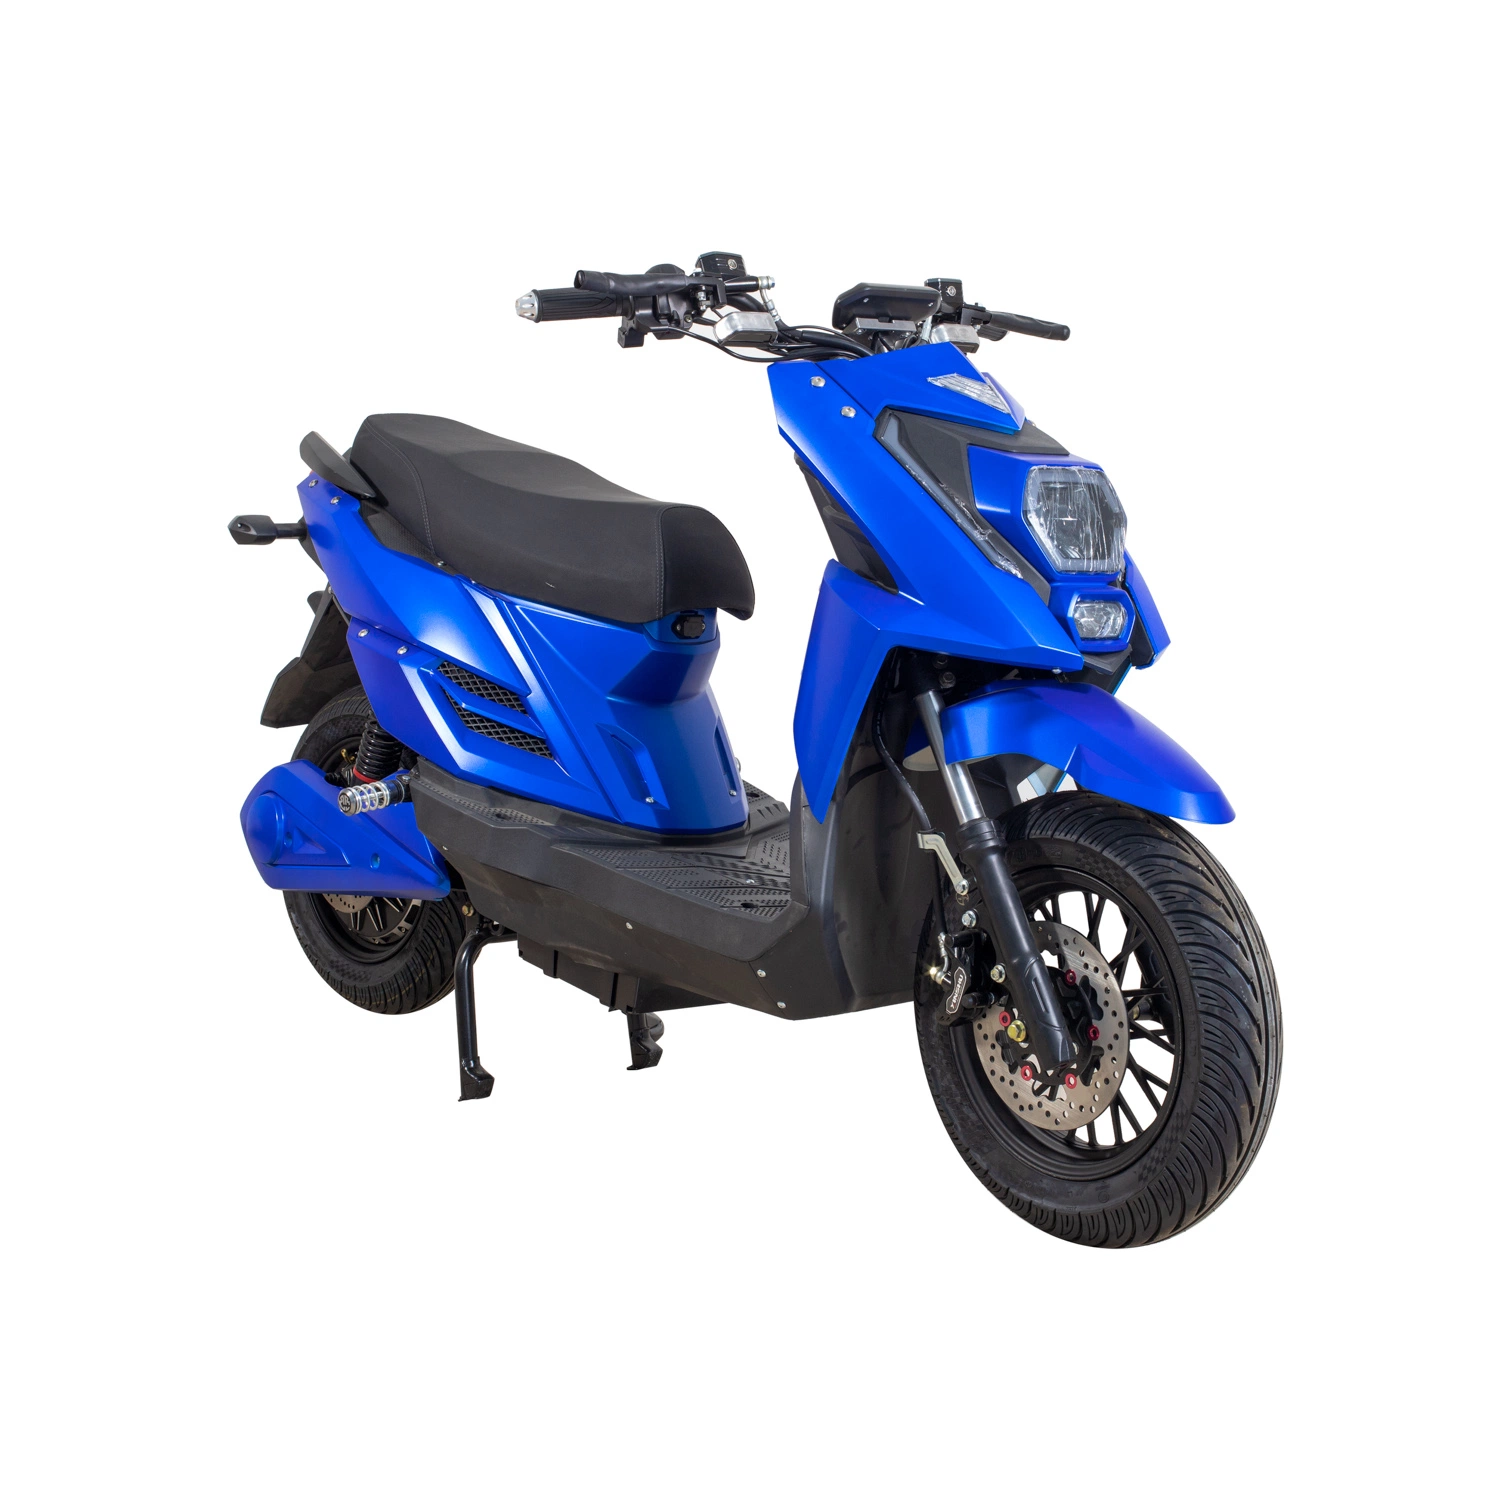 2022 Engtian 1000W 60V Electric Motorcycle Adult 2 Wheels High Speed Good Quality Electric Scooter